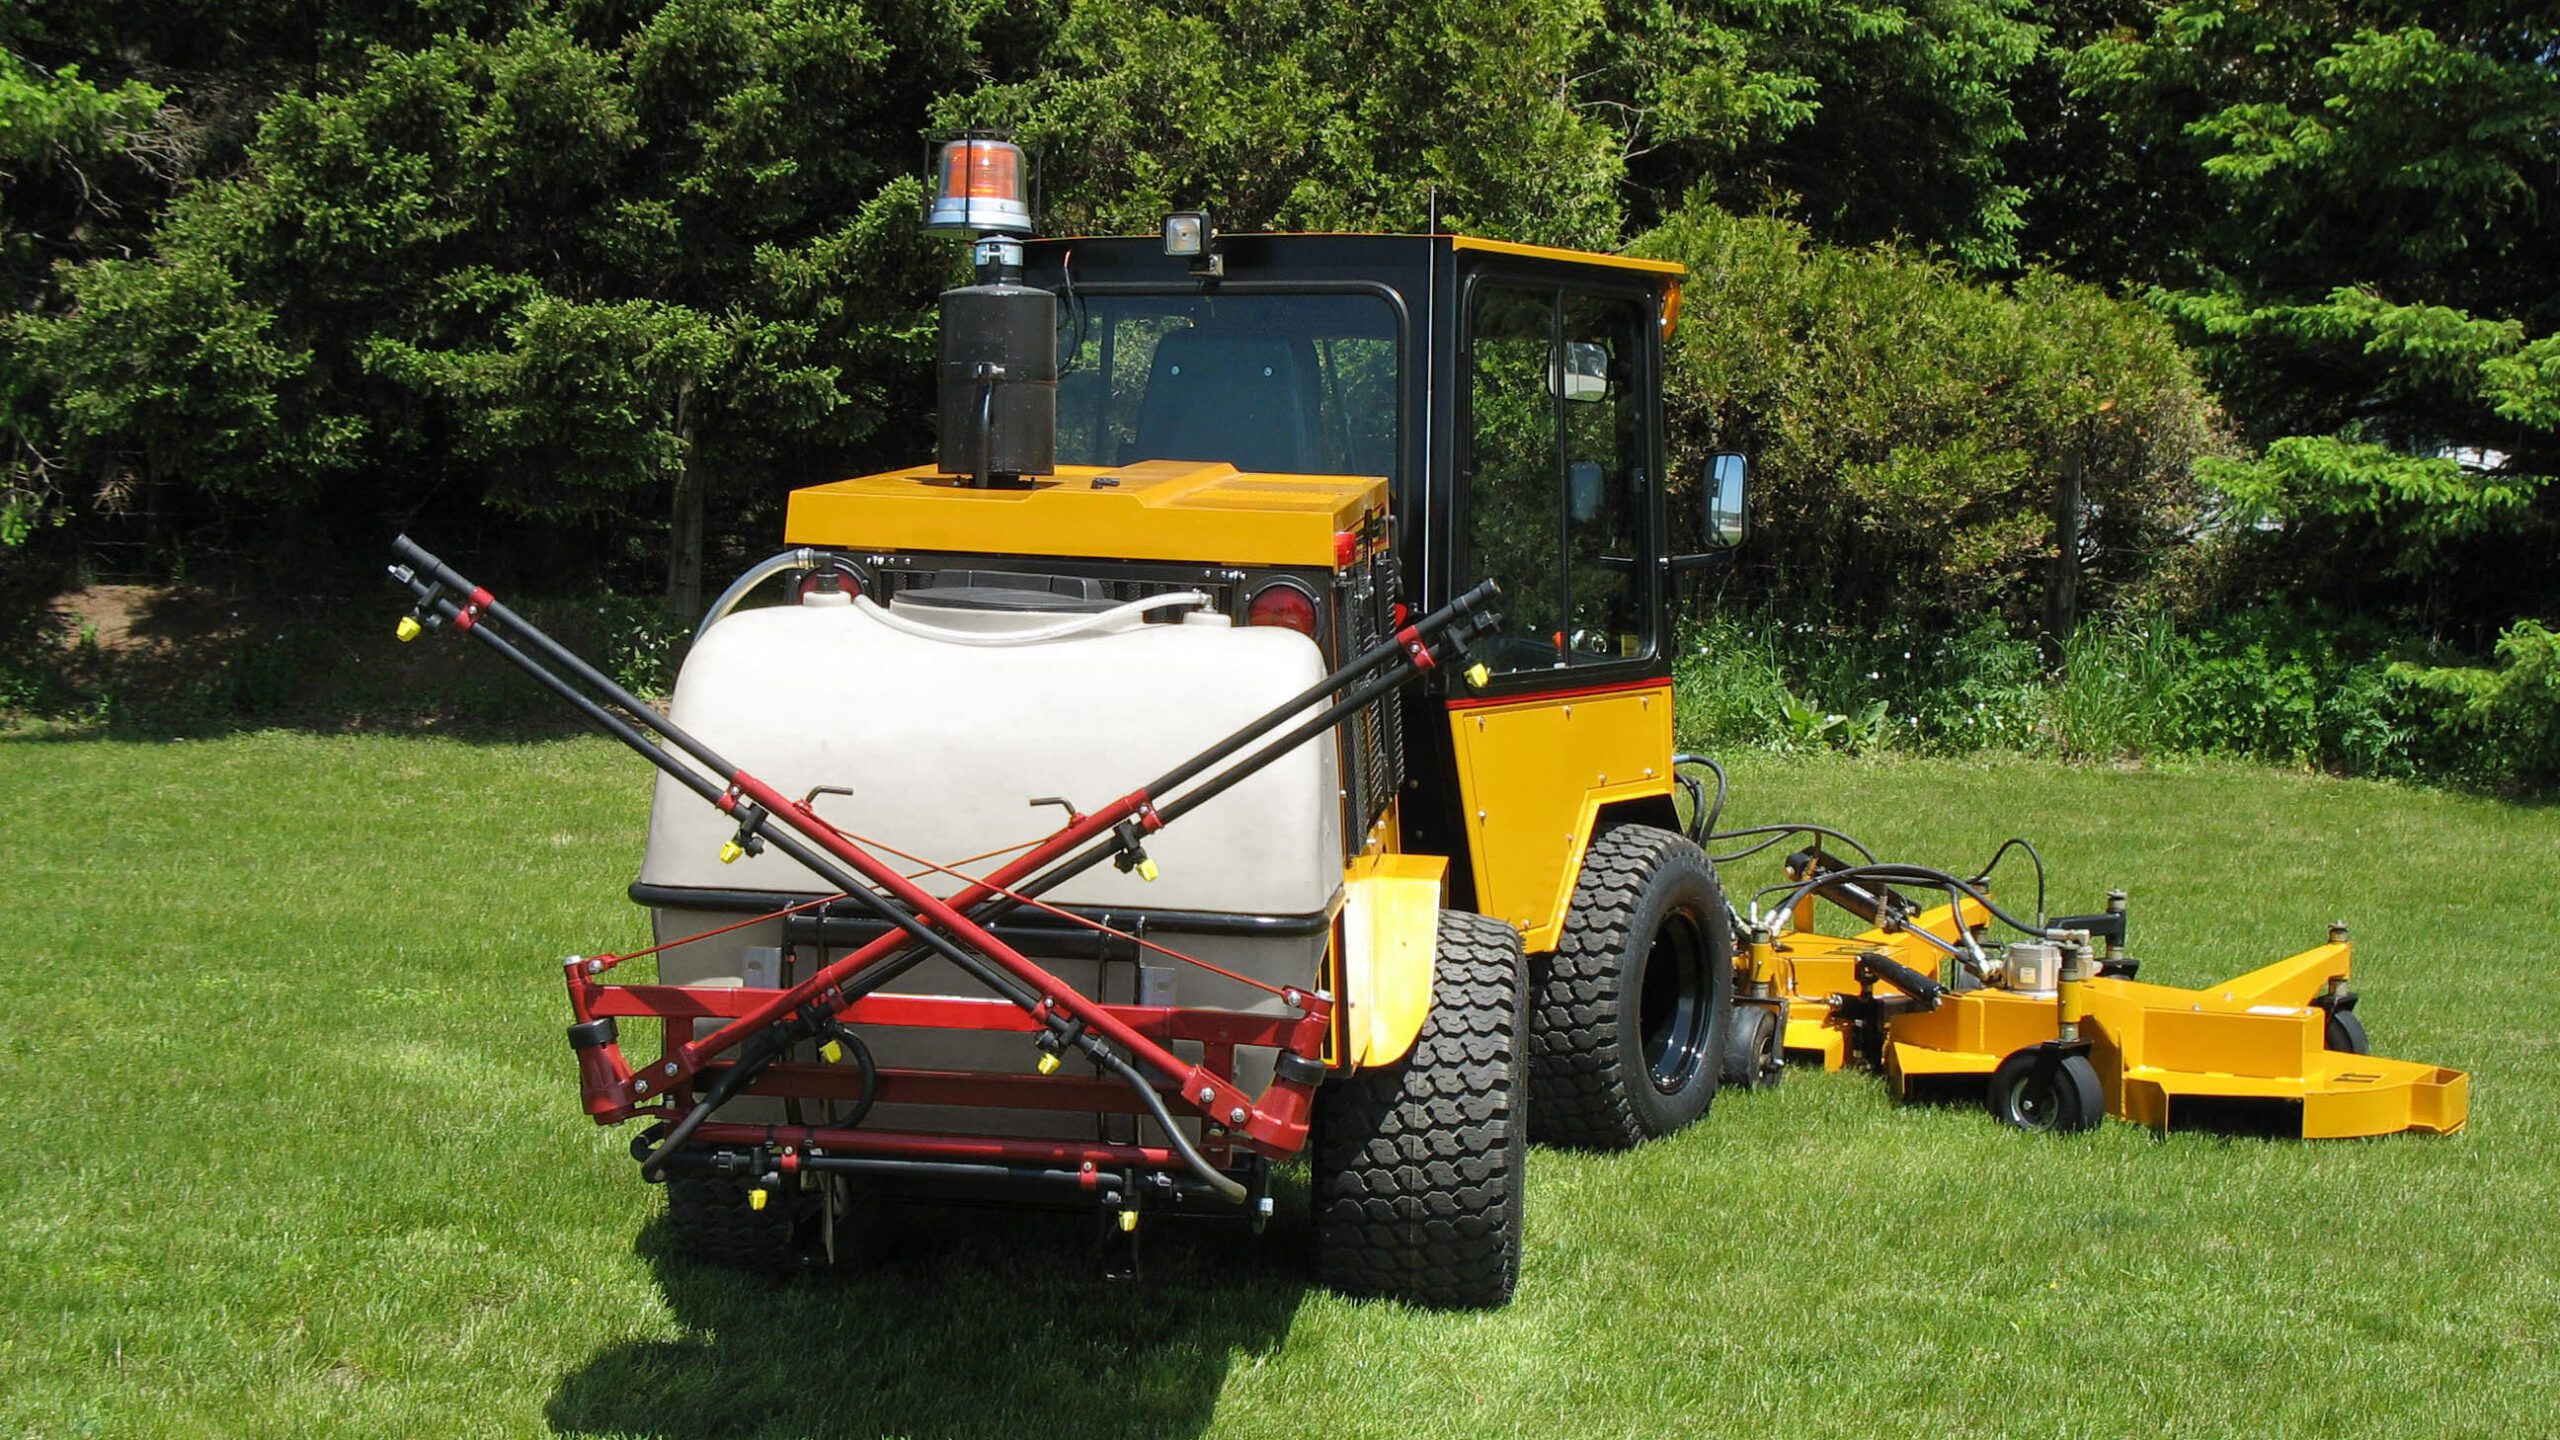 trackless vehicles mt6 tractor machine with rotary mower attachment, 80 gallon water tank attachment and spray bar attachment